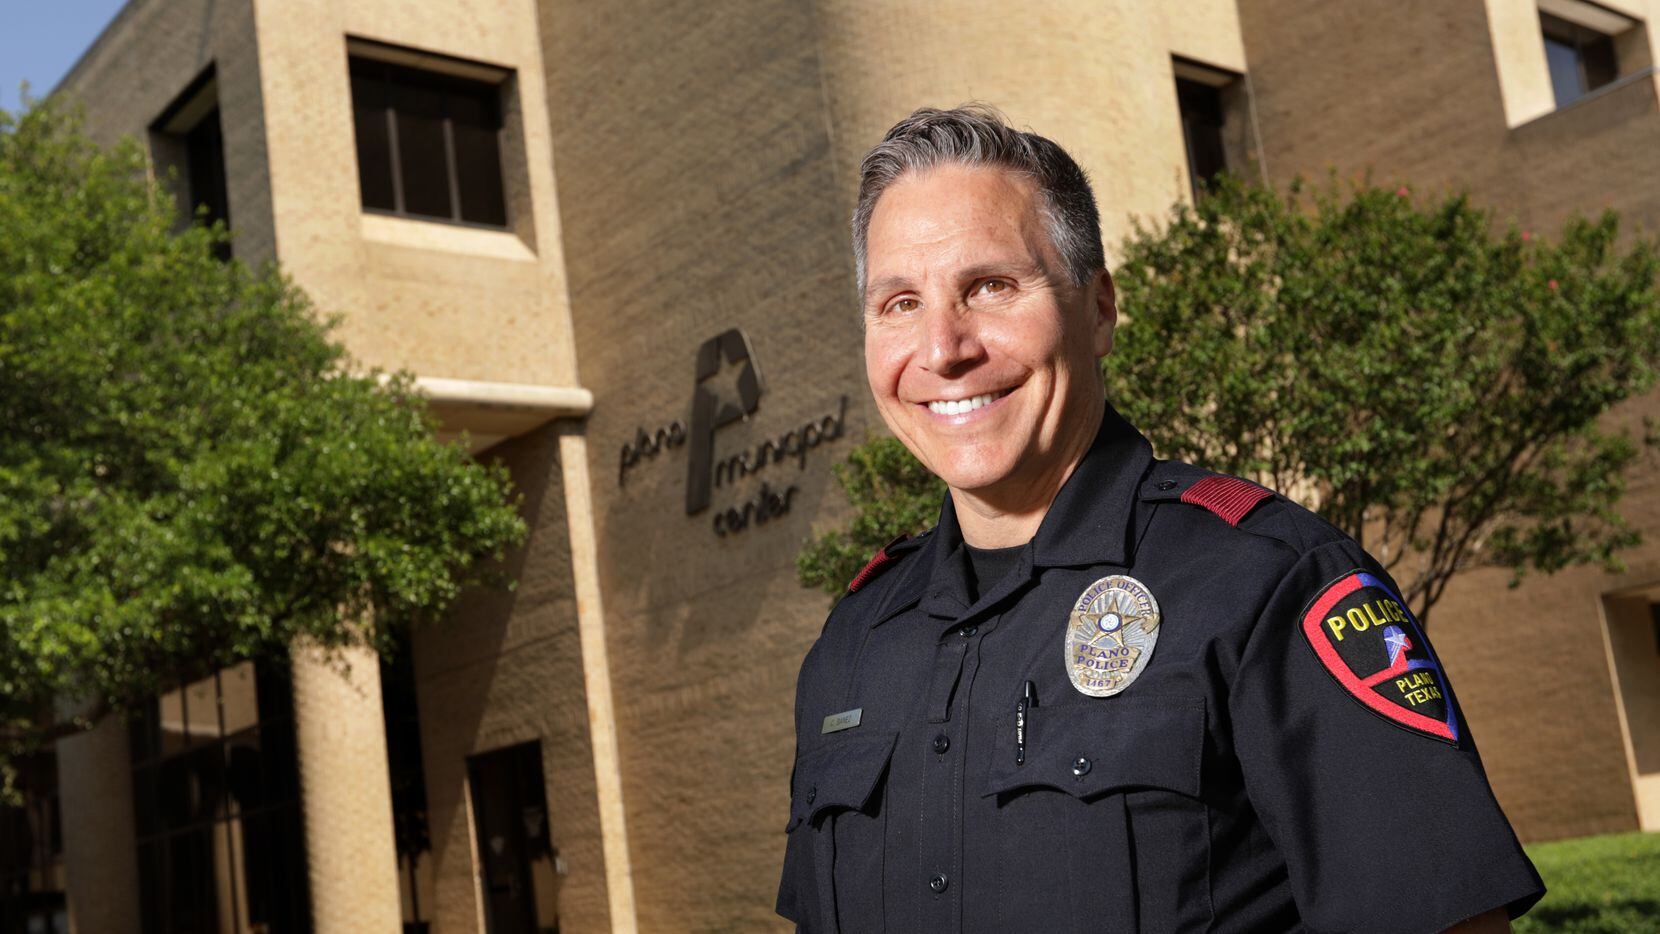 Plano police Officer Christopher Bianez has made it his mission to warn seniors about scams...